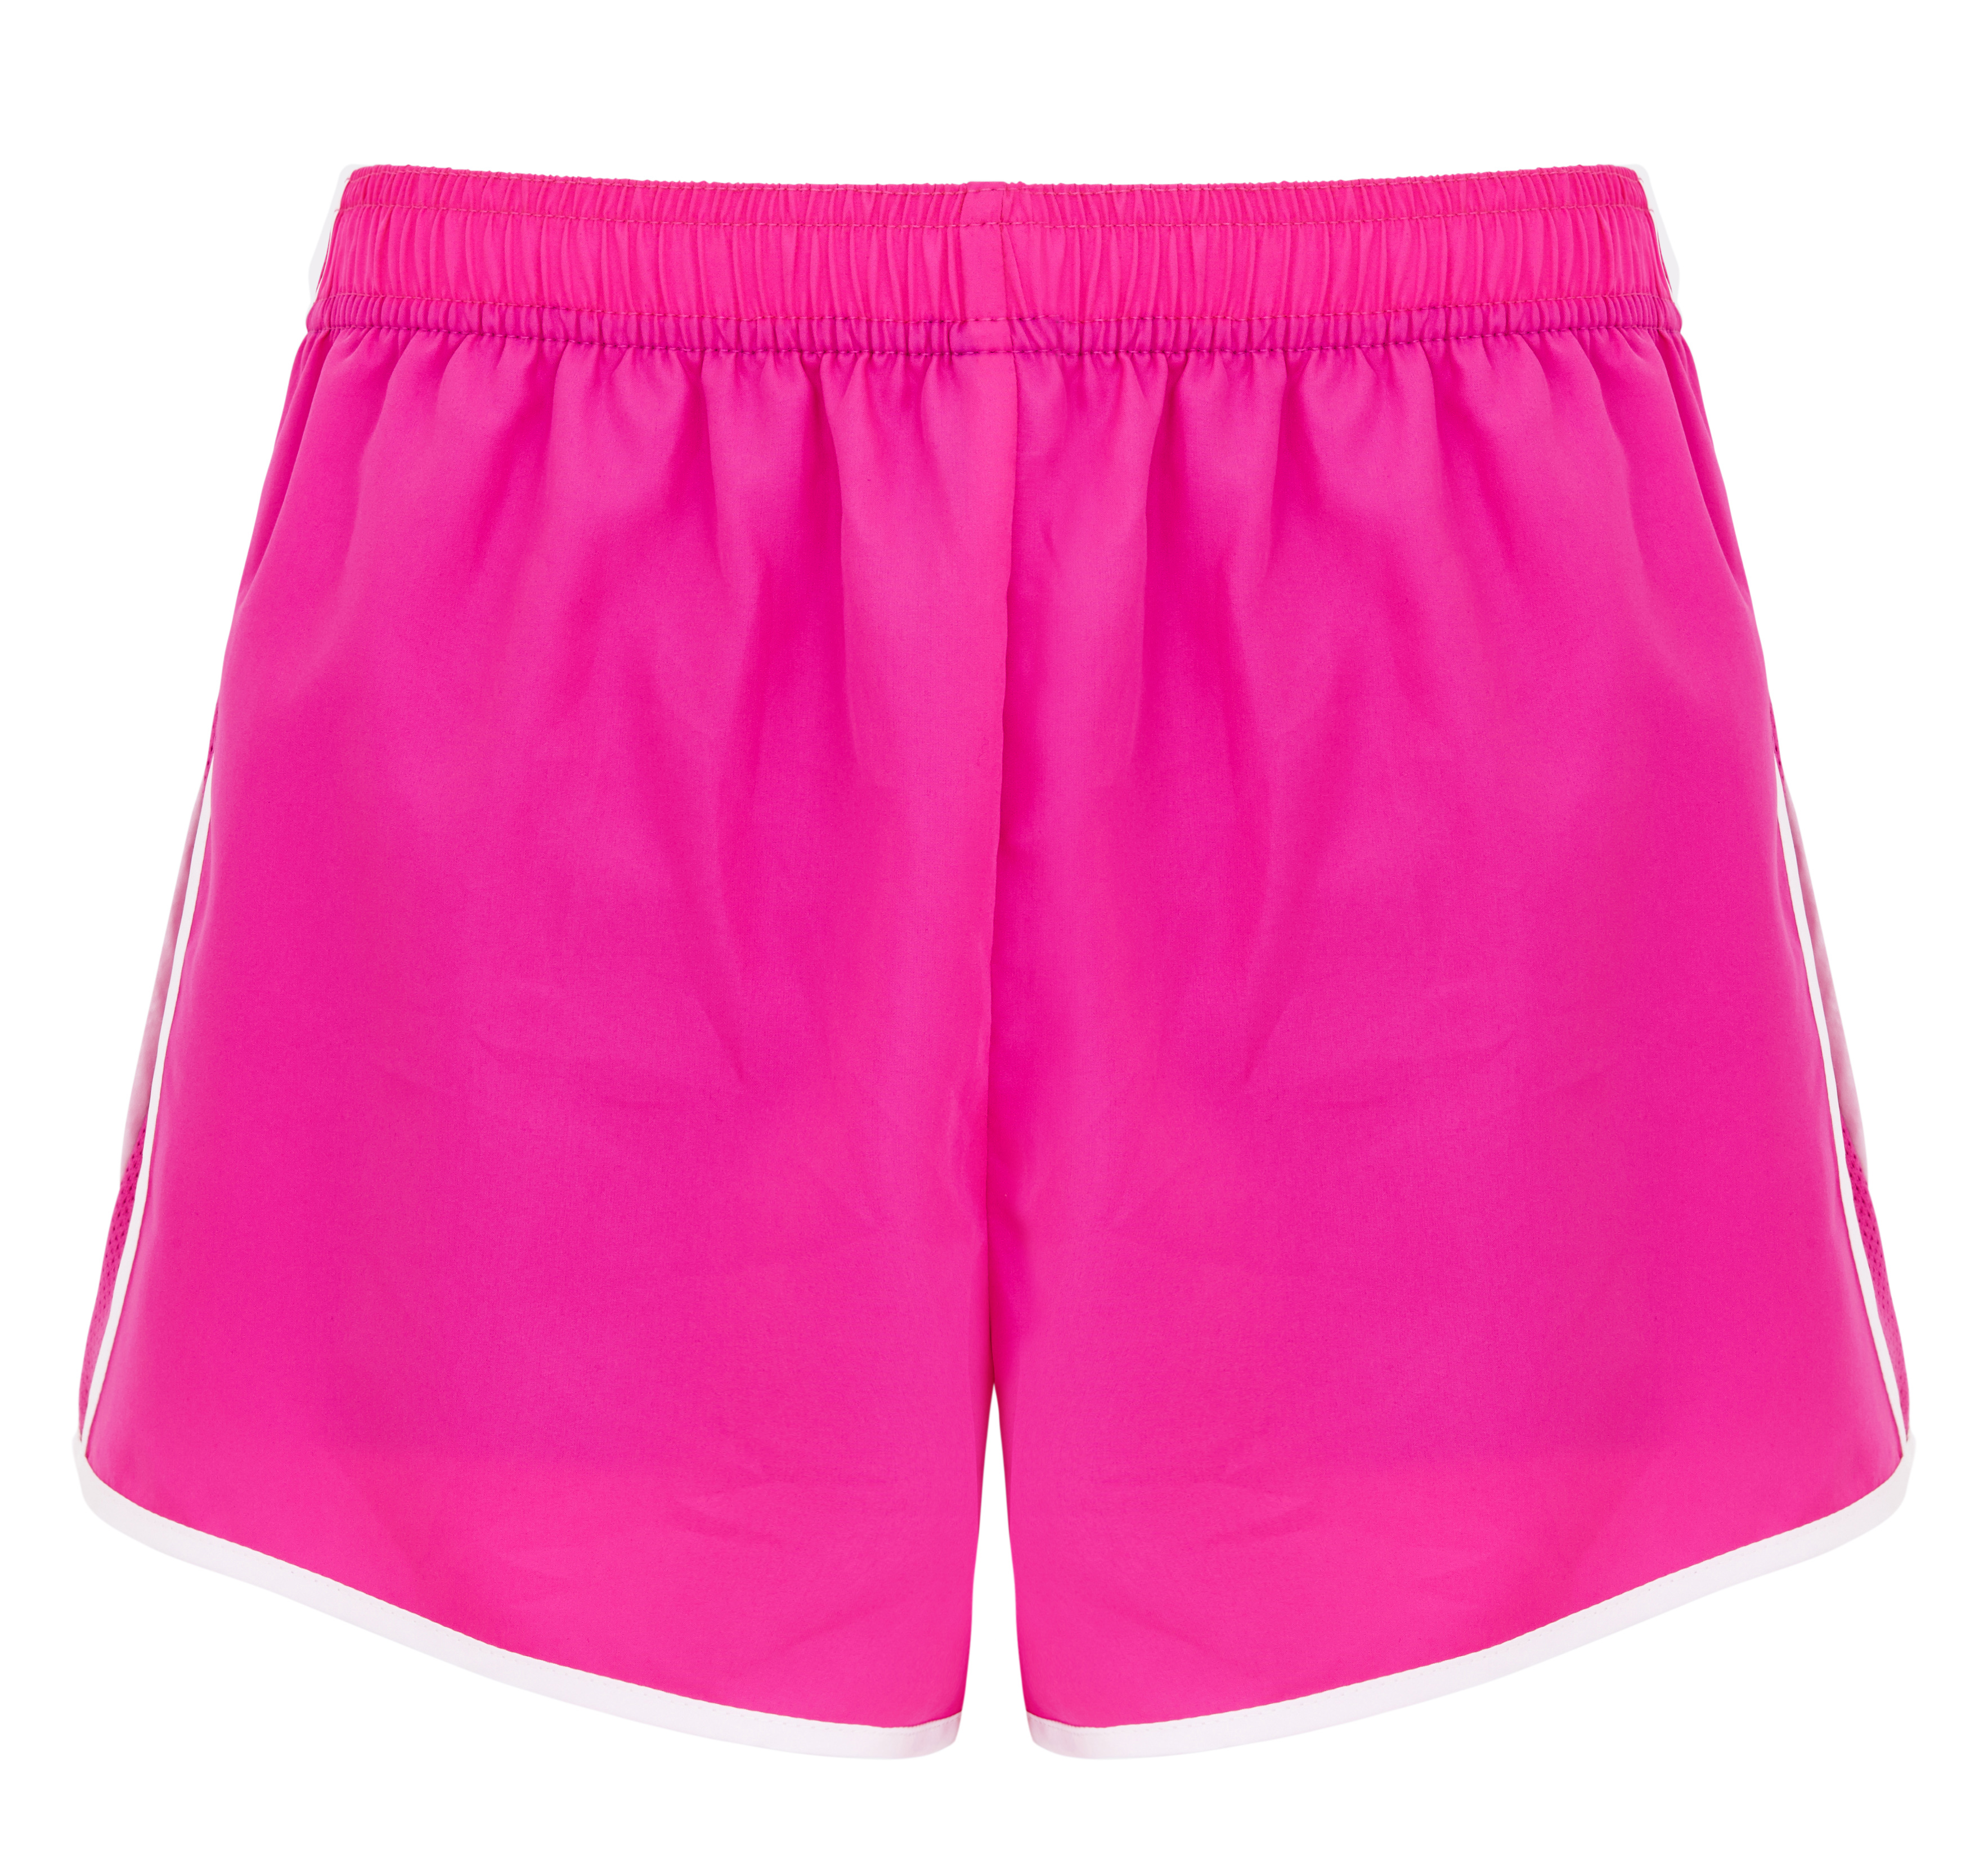 30 Minute Pink workout shorts with Comfort Workout Clothes